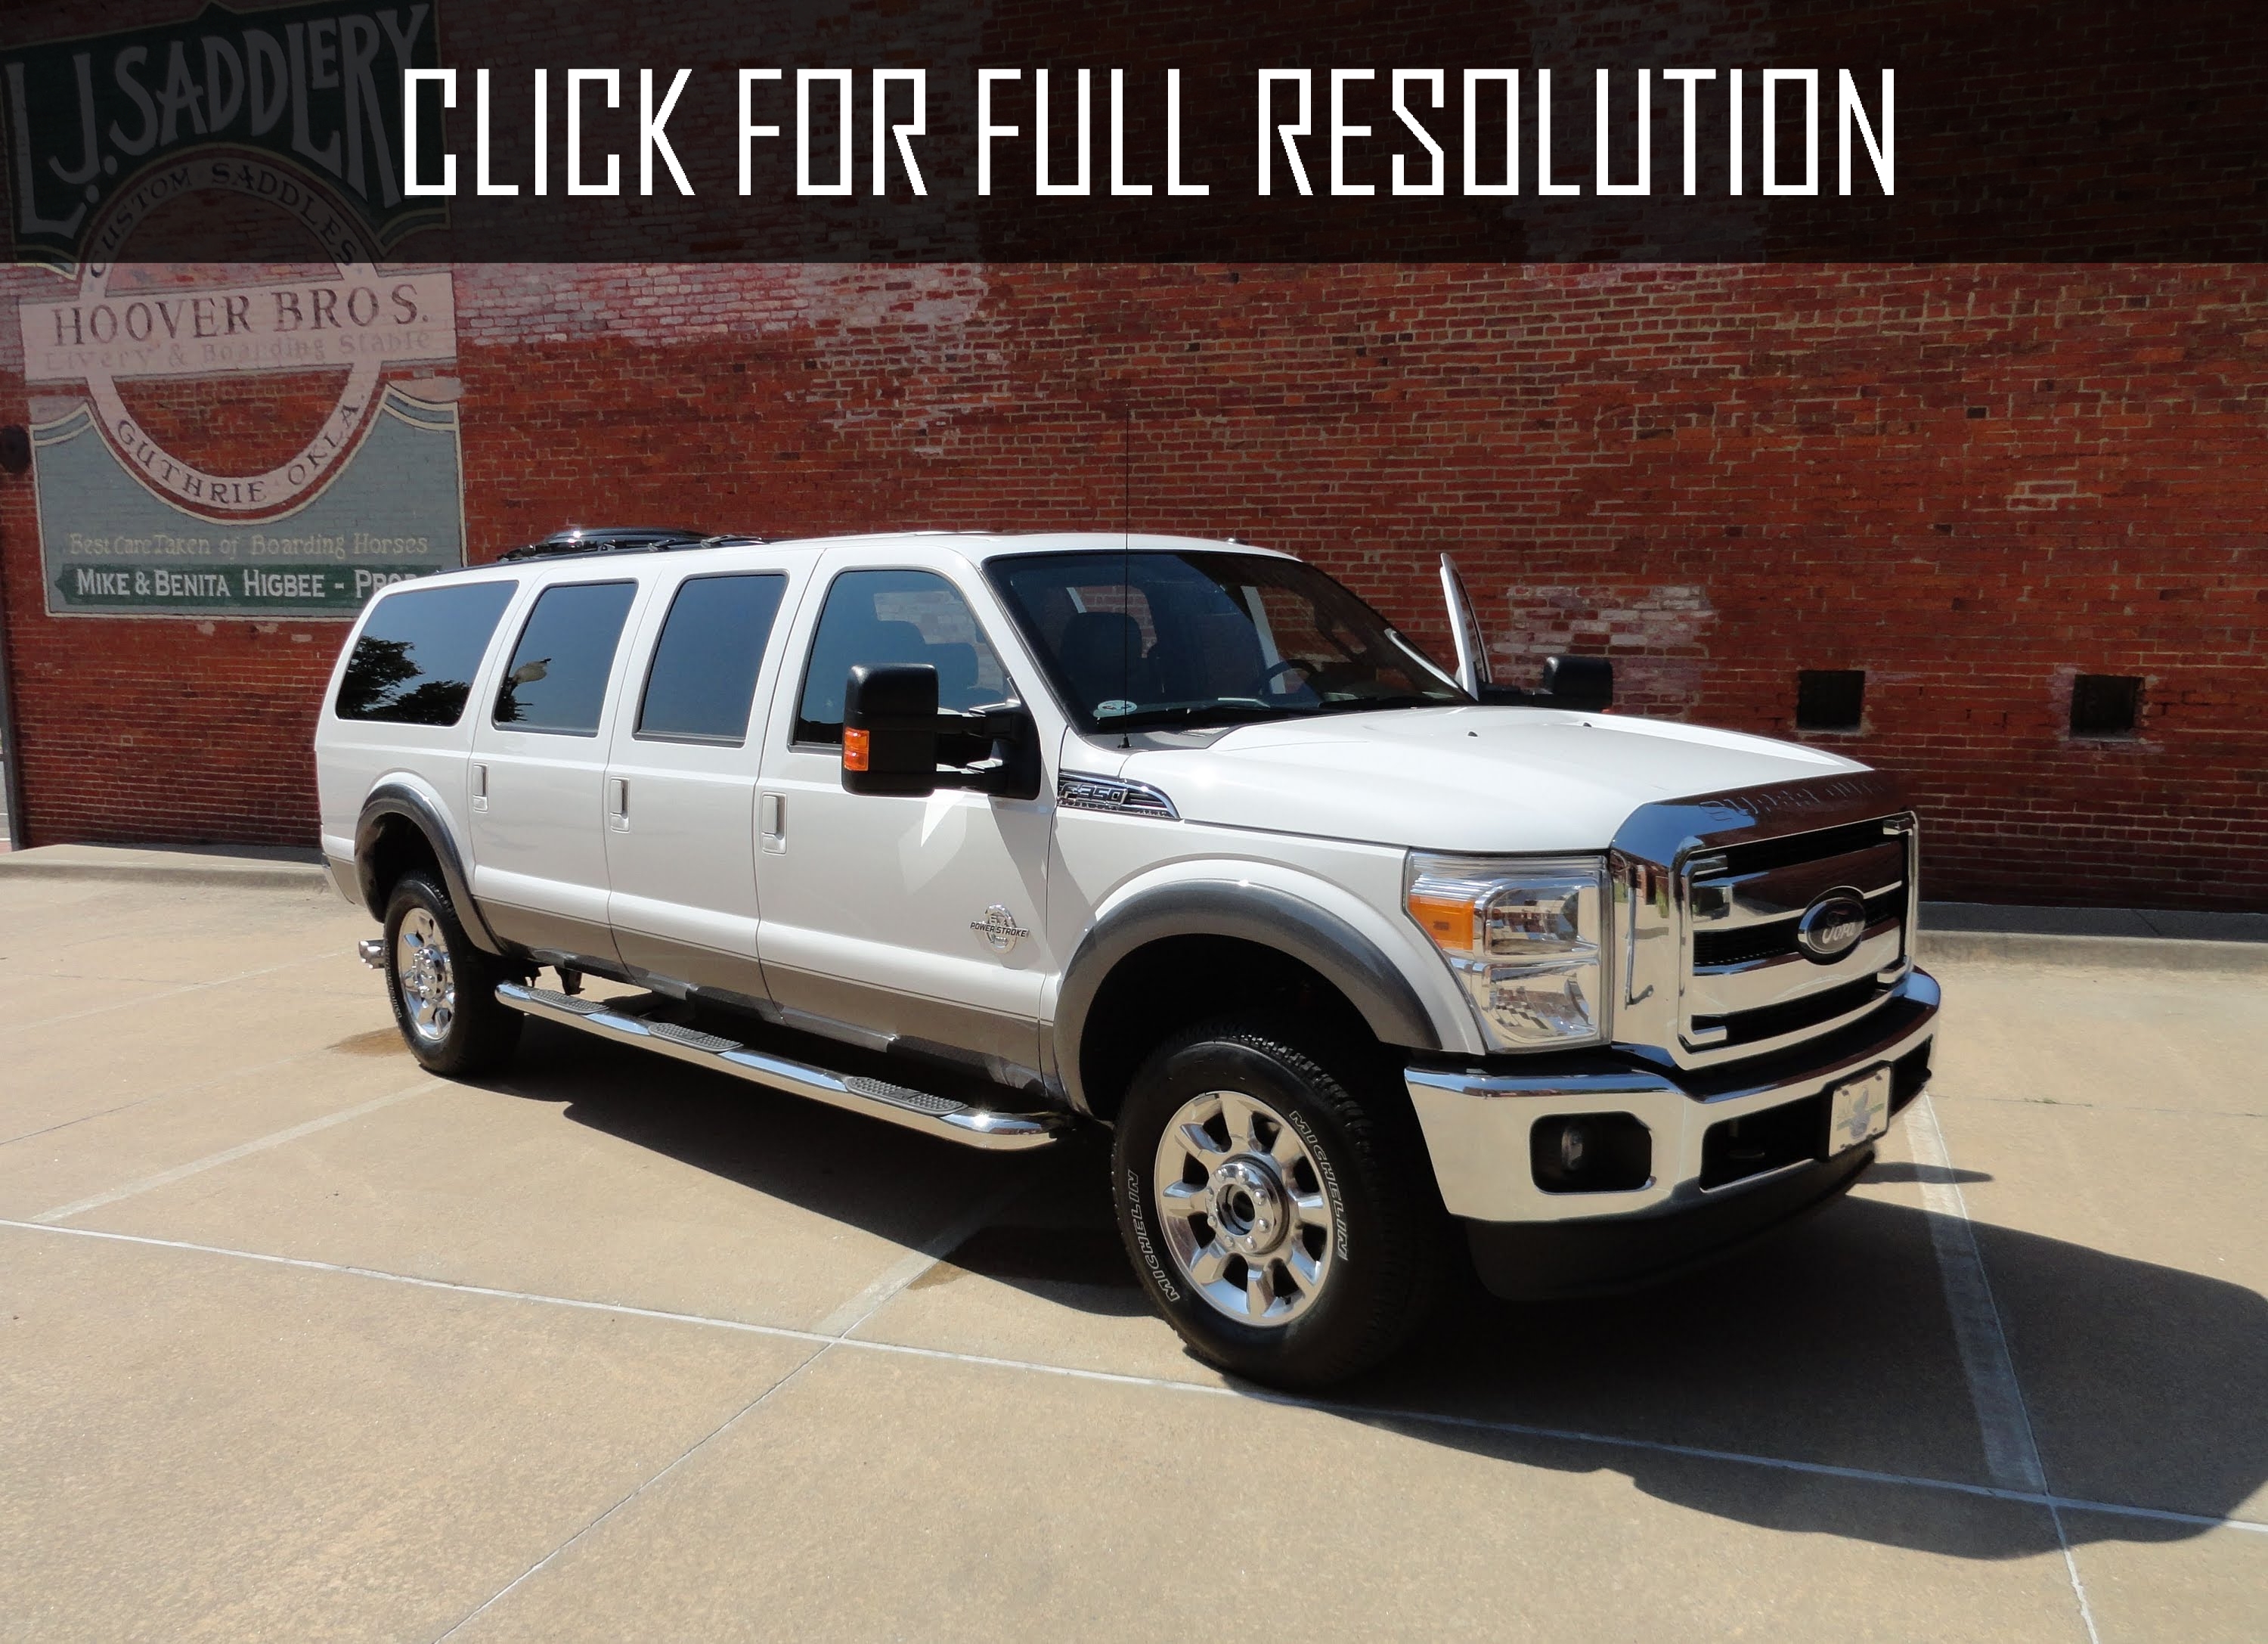 2013 Ford Excursion